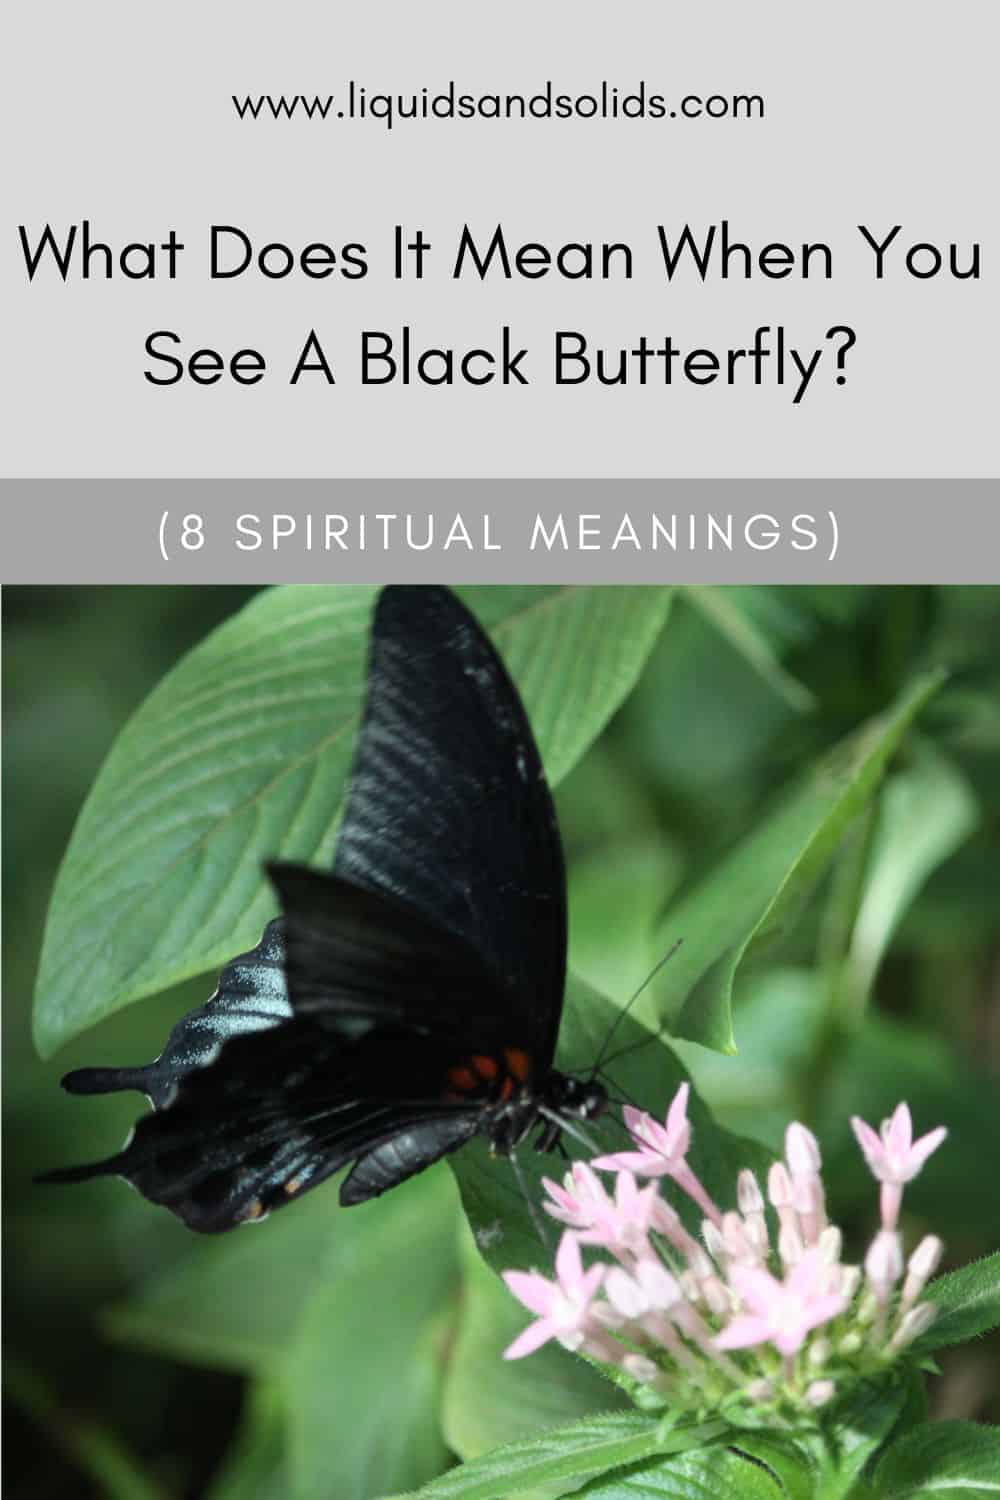 What Does It Mean When You See A Black Butterfly? (8 Spiritual Meanings)